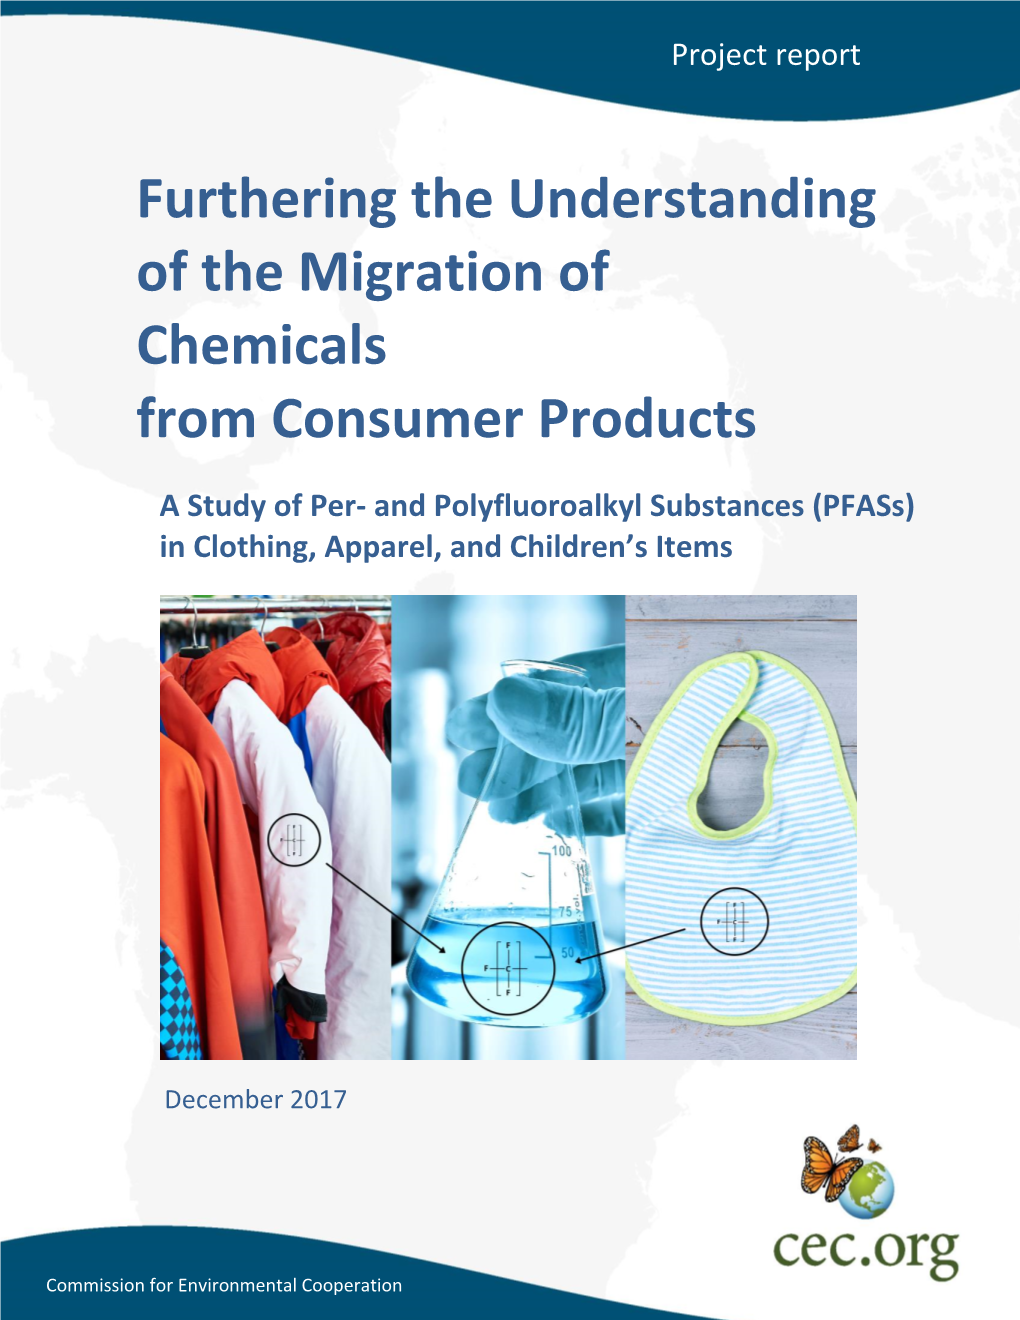 Furthering the Understanding of the Migration of Chemicals from Consumer Products